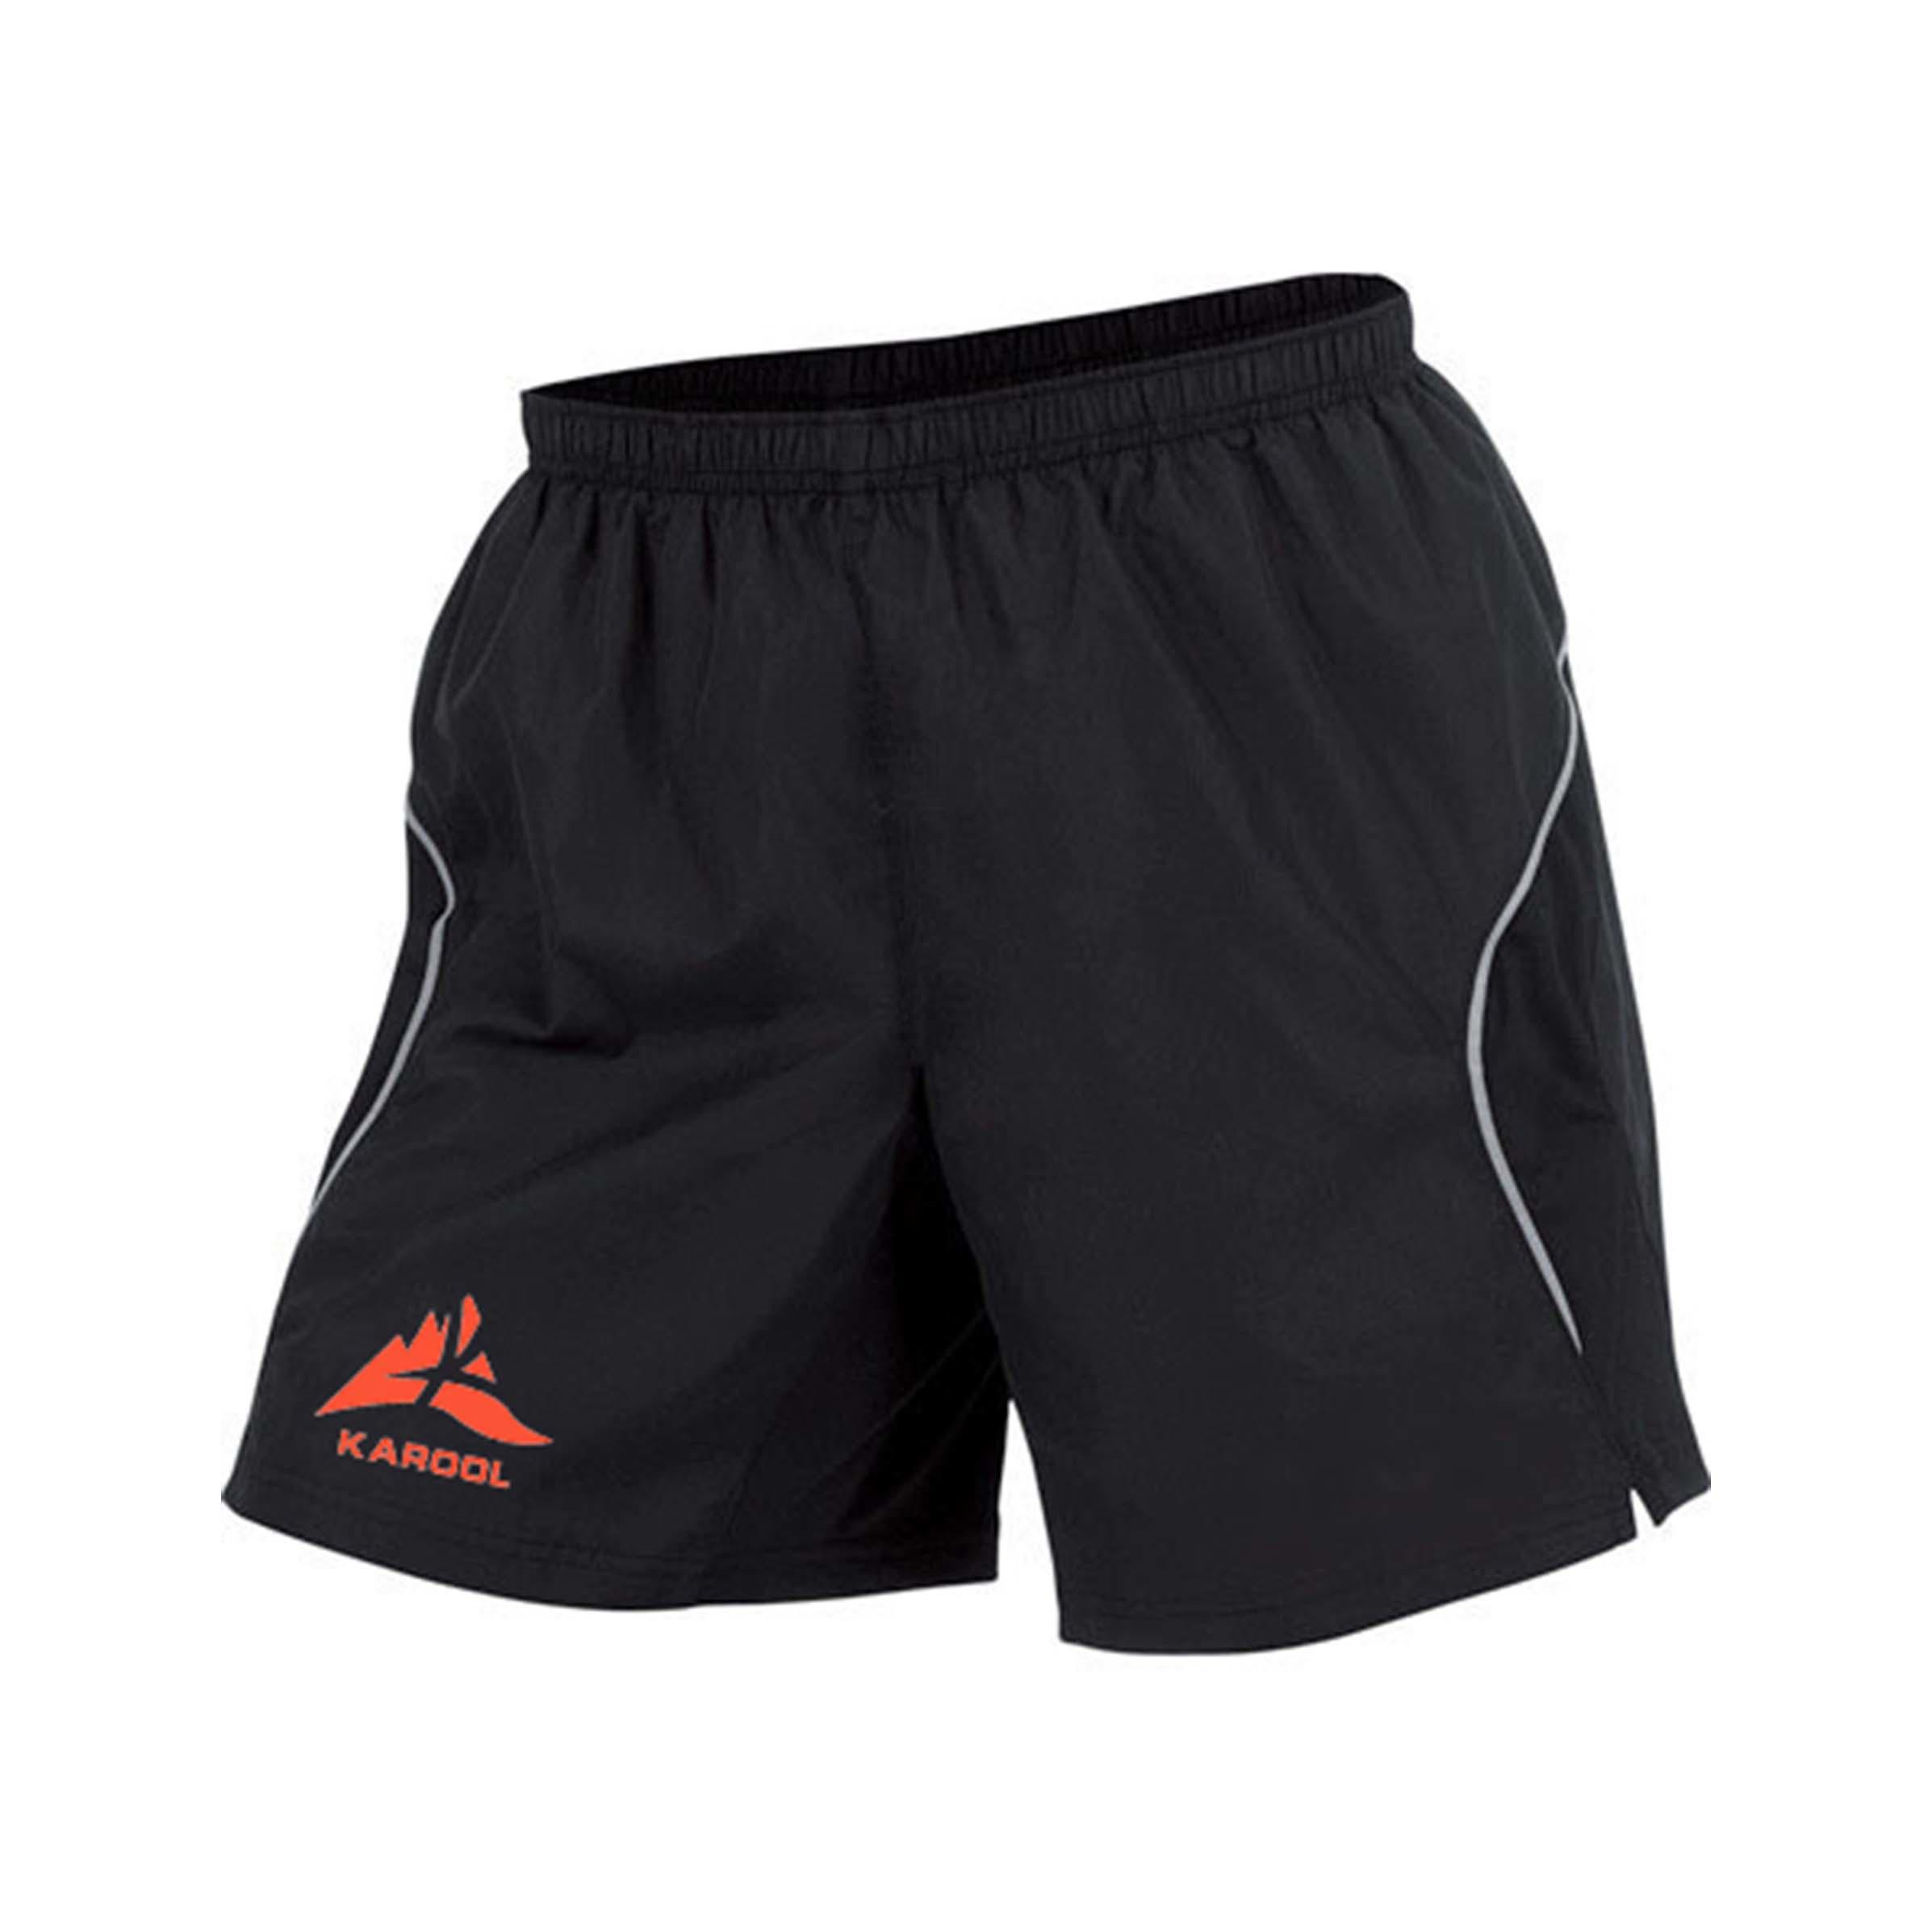 Karool running compression shorts wholesale for women-1